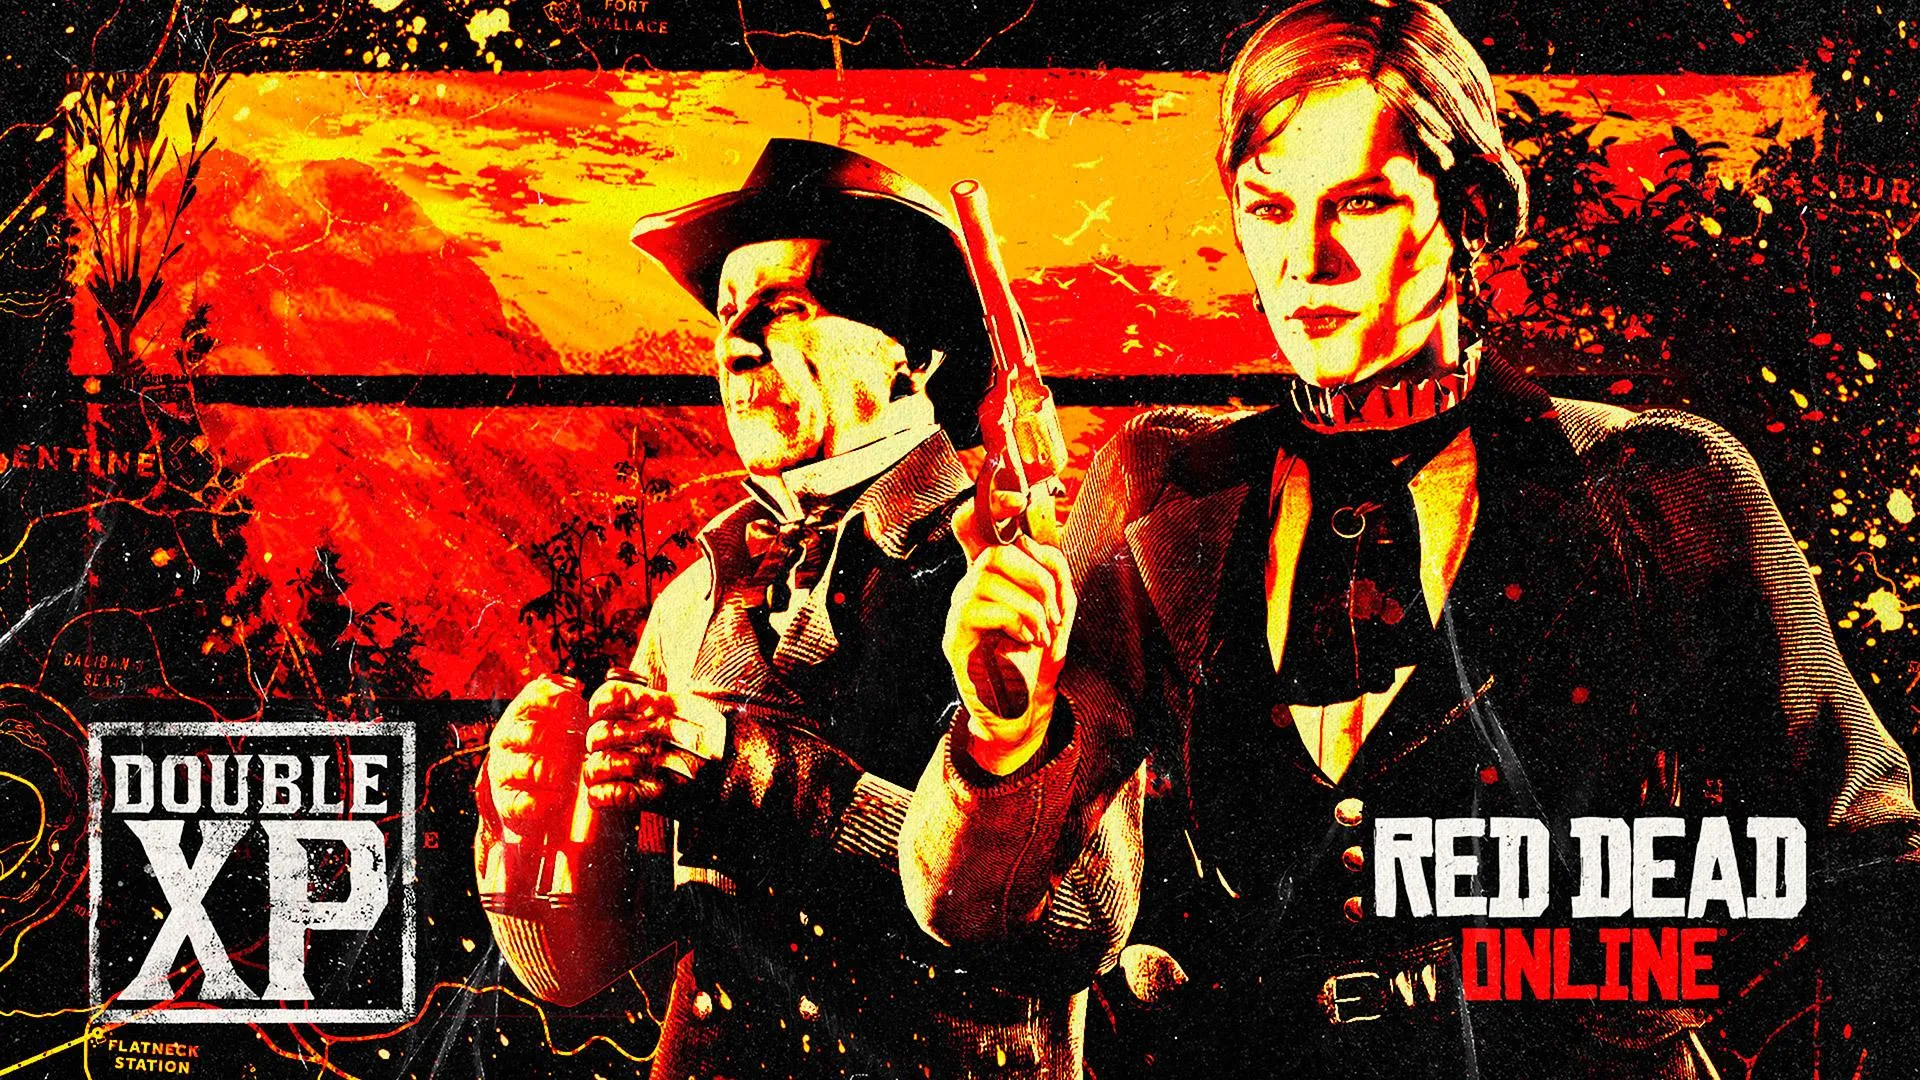 Red Dead Online: 2X XP on A Land of Opportunities Missions and All Bounty Hunter Missions & more